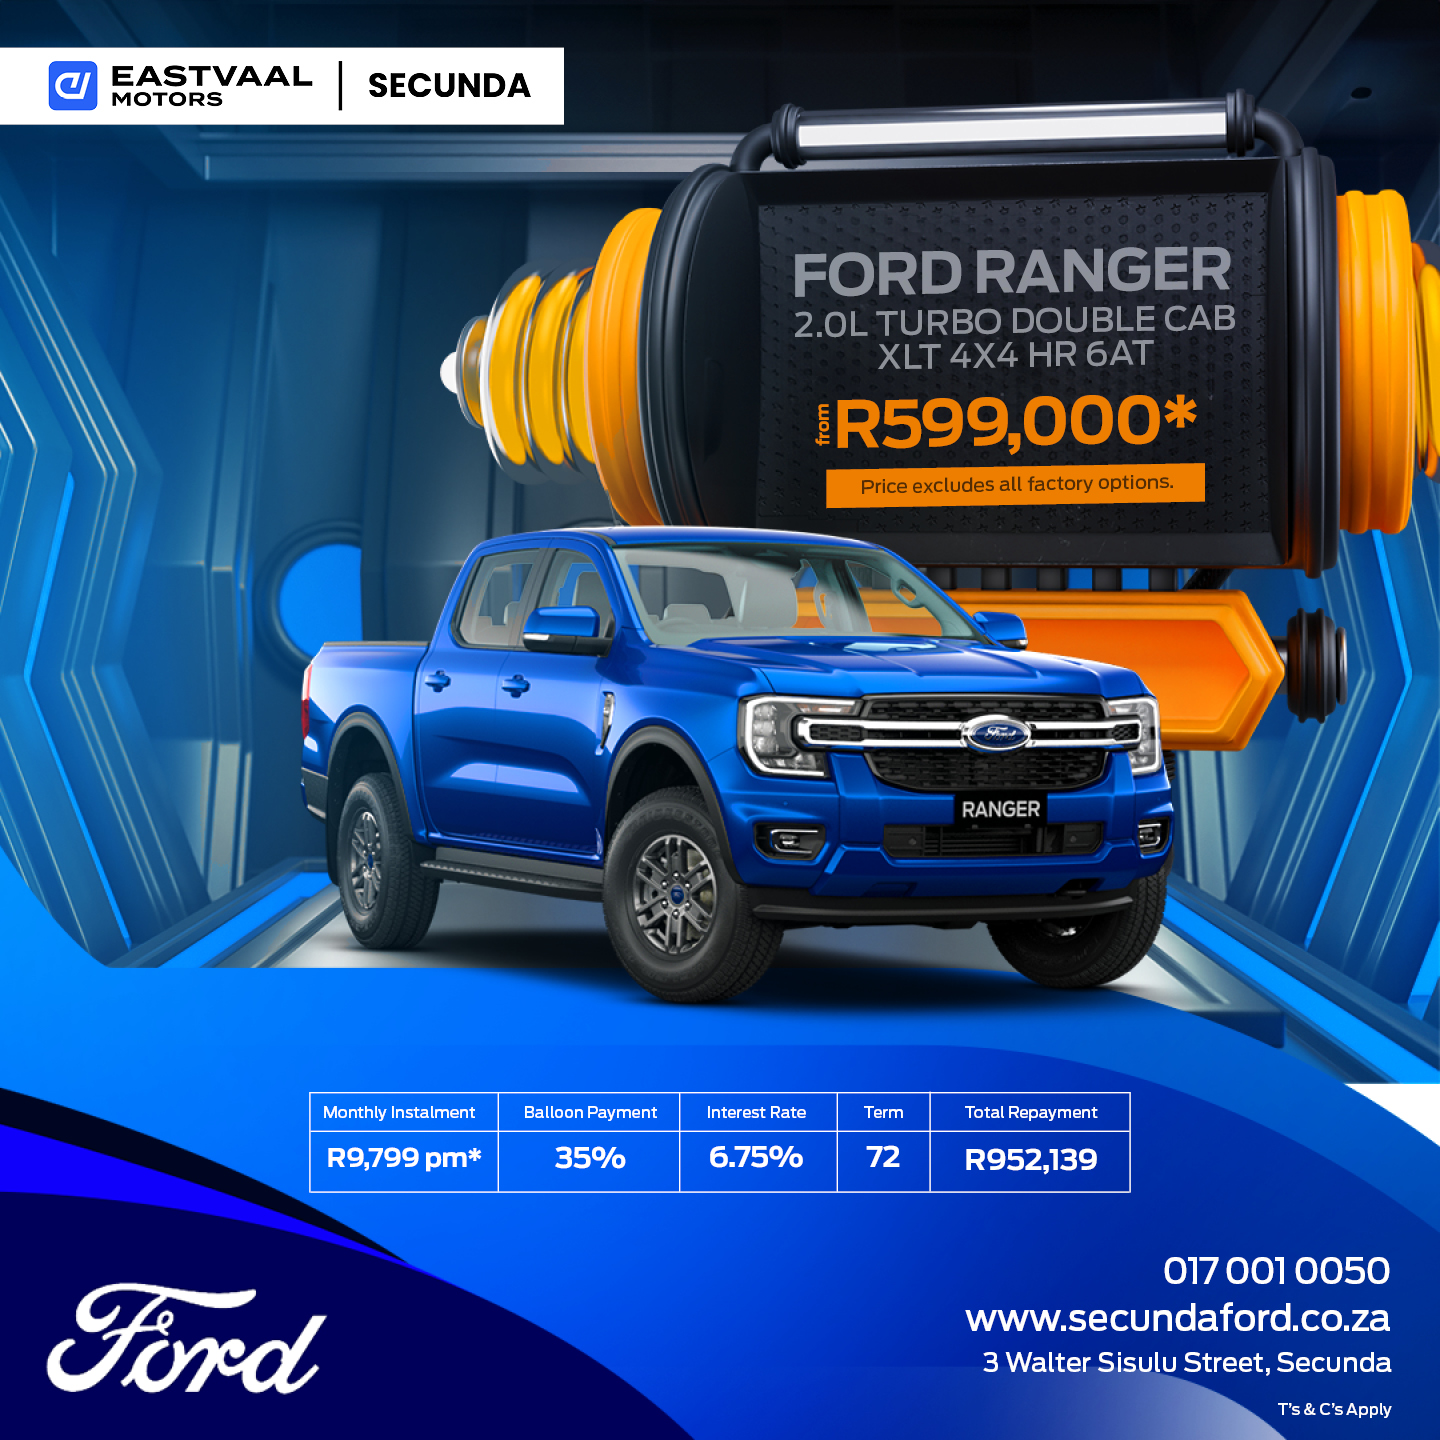 Ford Ranger 2.0L Turbo Double Cab XLT 4X4 HR 6AT image from 